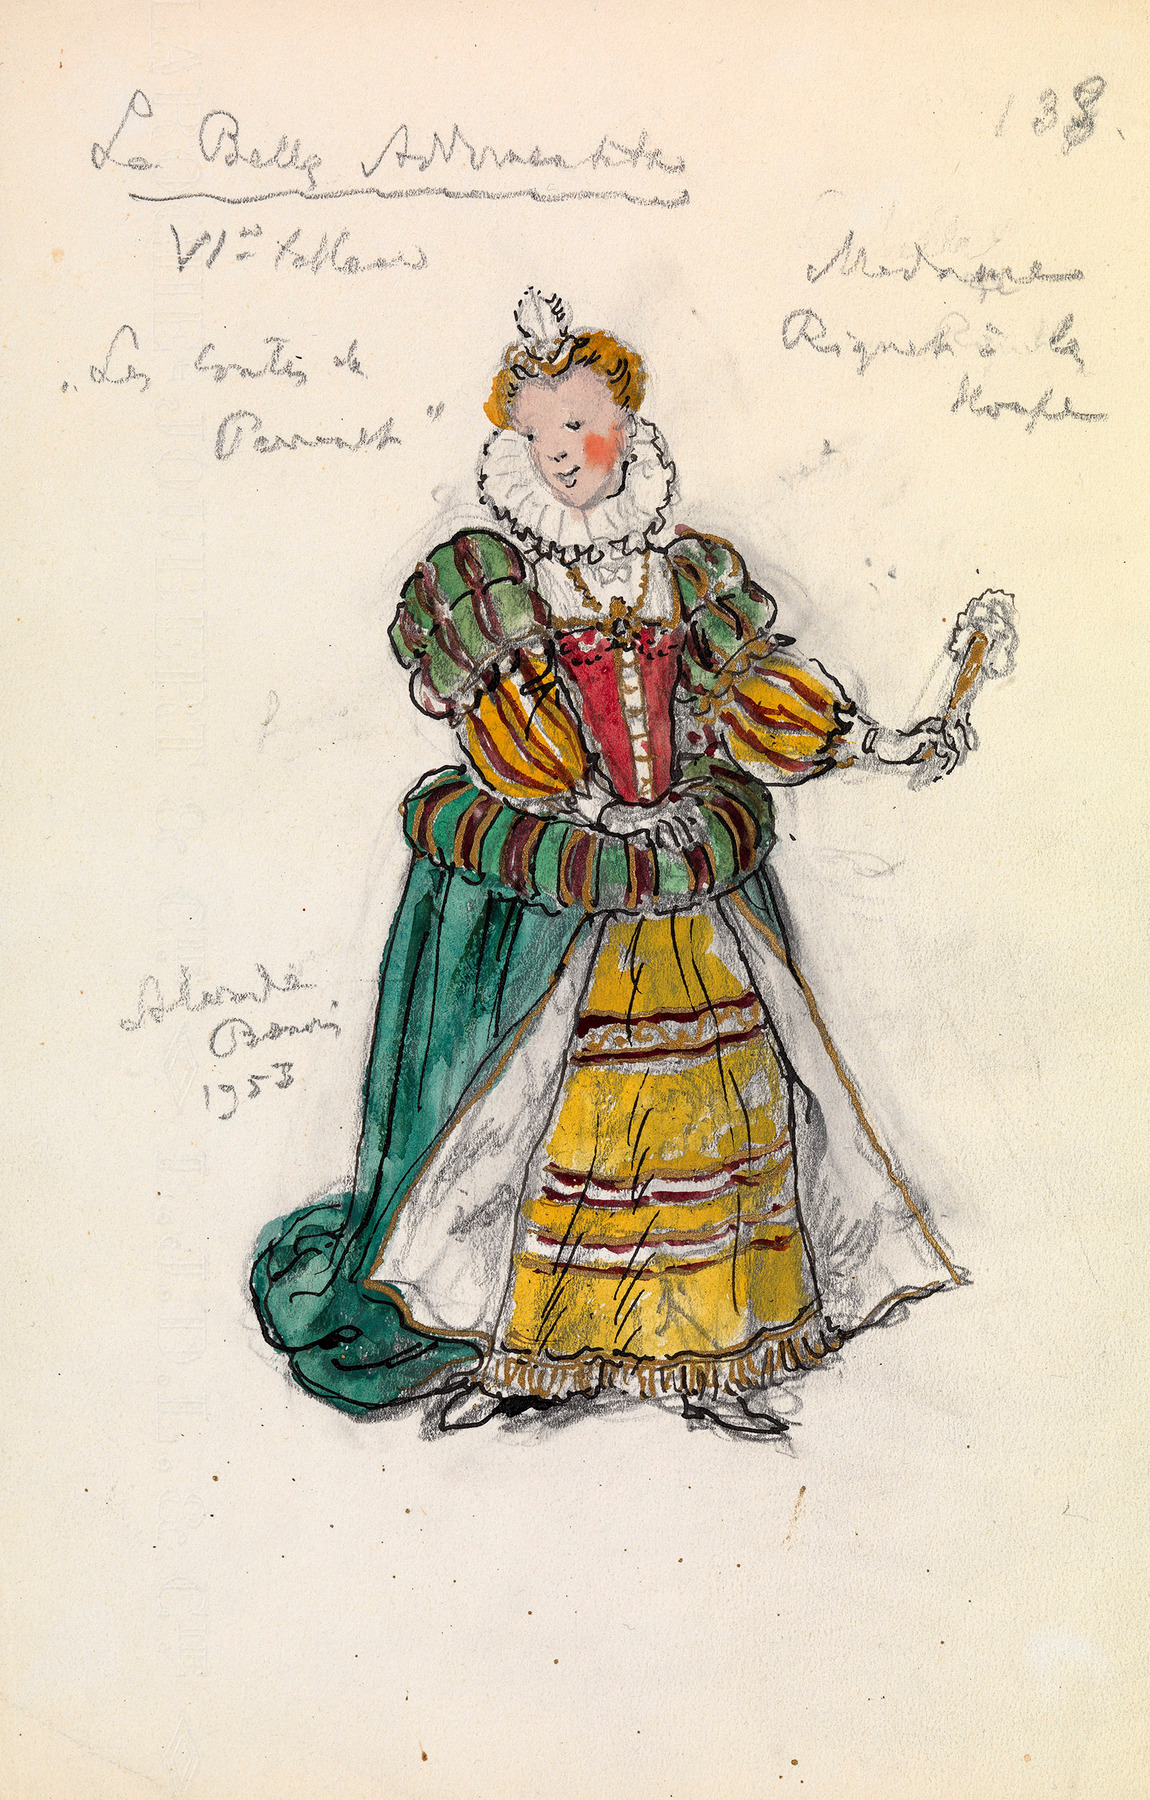 Costume Designs for Tchaikovsky's Ballet "The Sleeping Beauty"